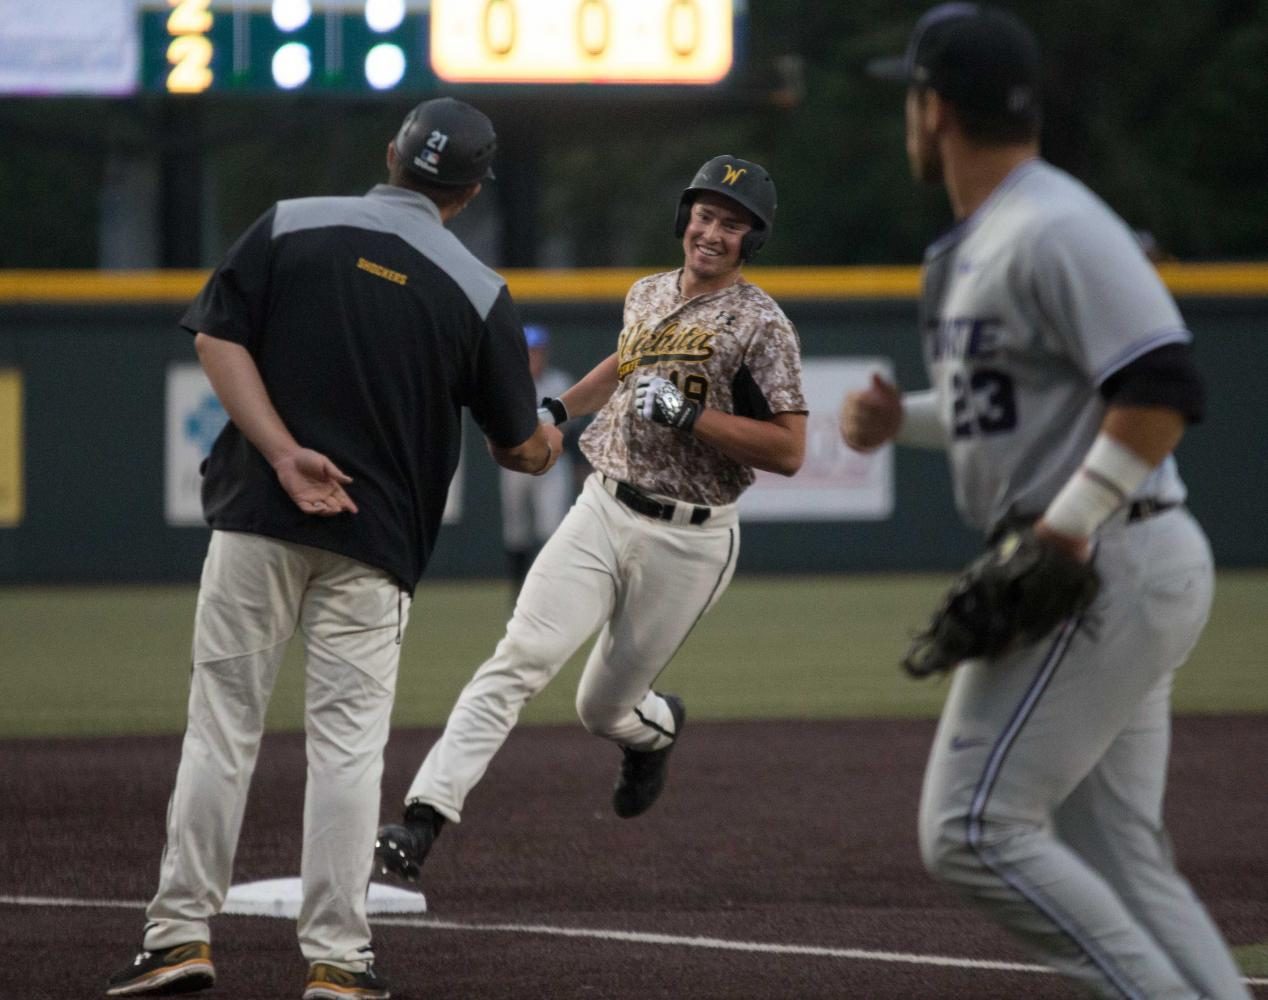 Wichita State sophomore Luke Ritter smiles at assistant coach Brian Walker after hitting a walk-off home run to beat K-State 3-2 Tuesday evening at Eck Stadium.